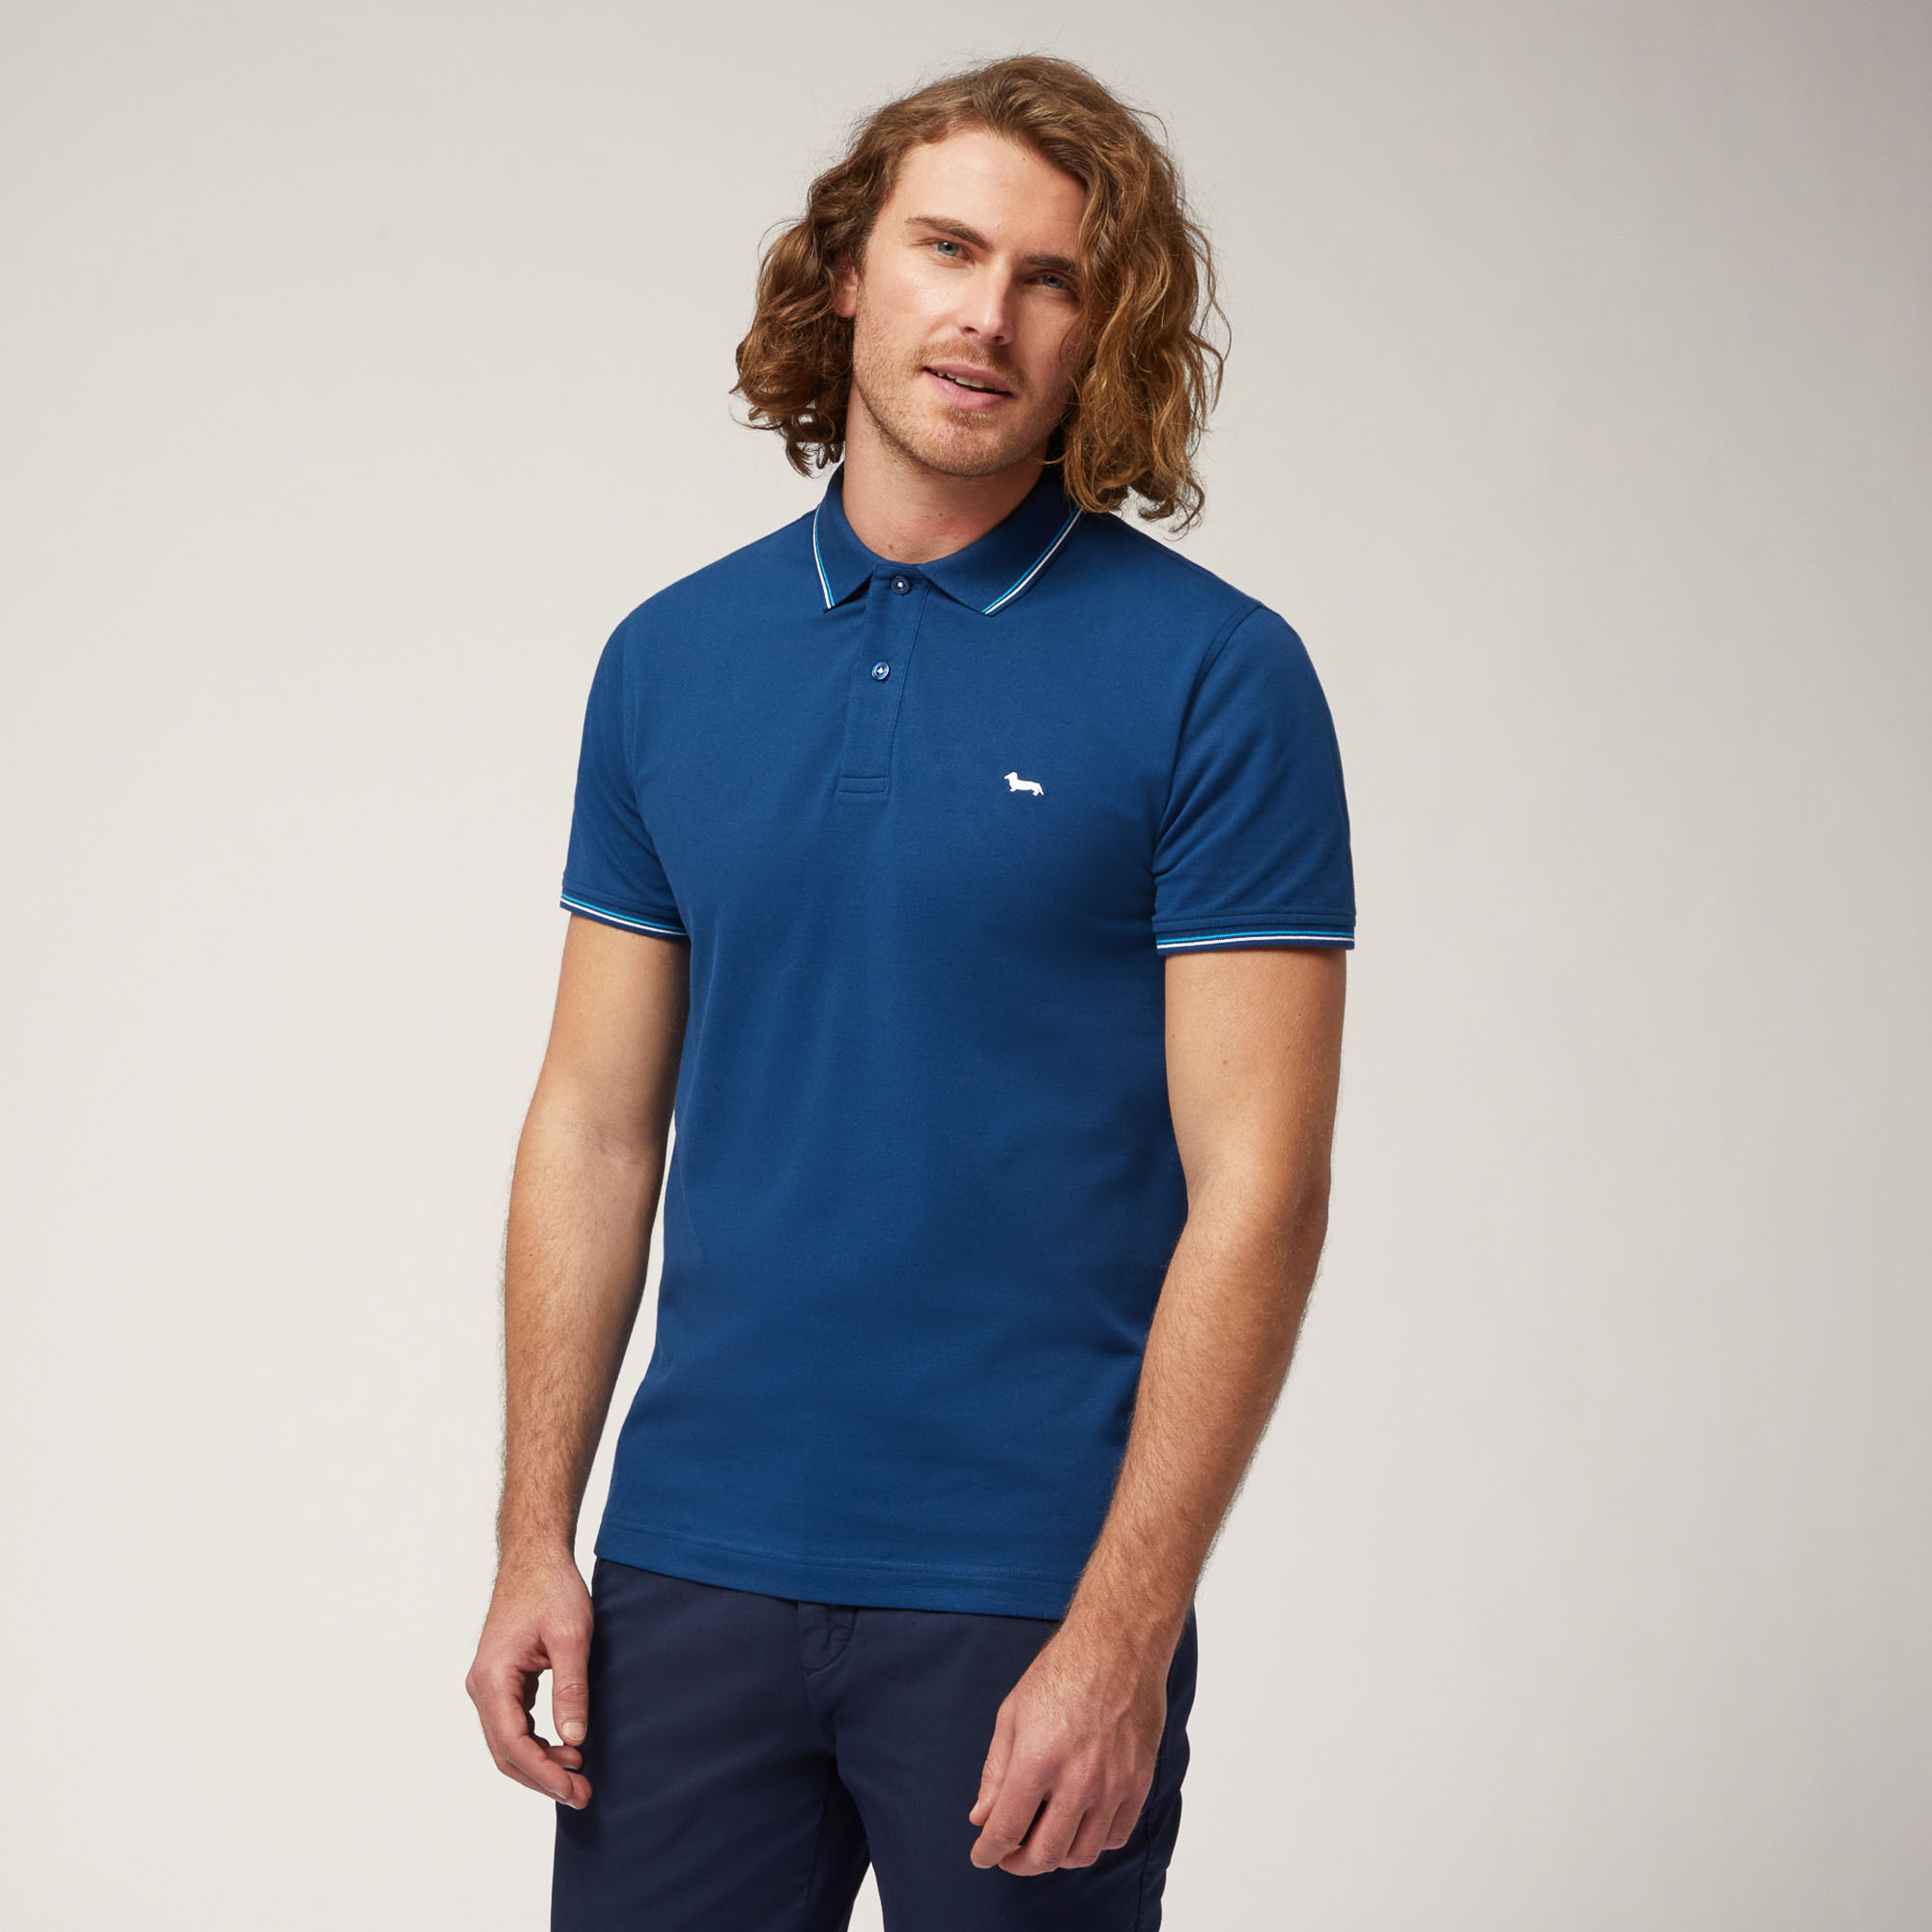 Polo with Striped Details, Light Blue, large